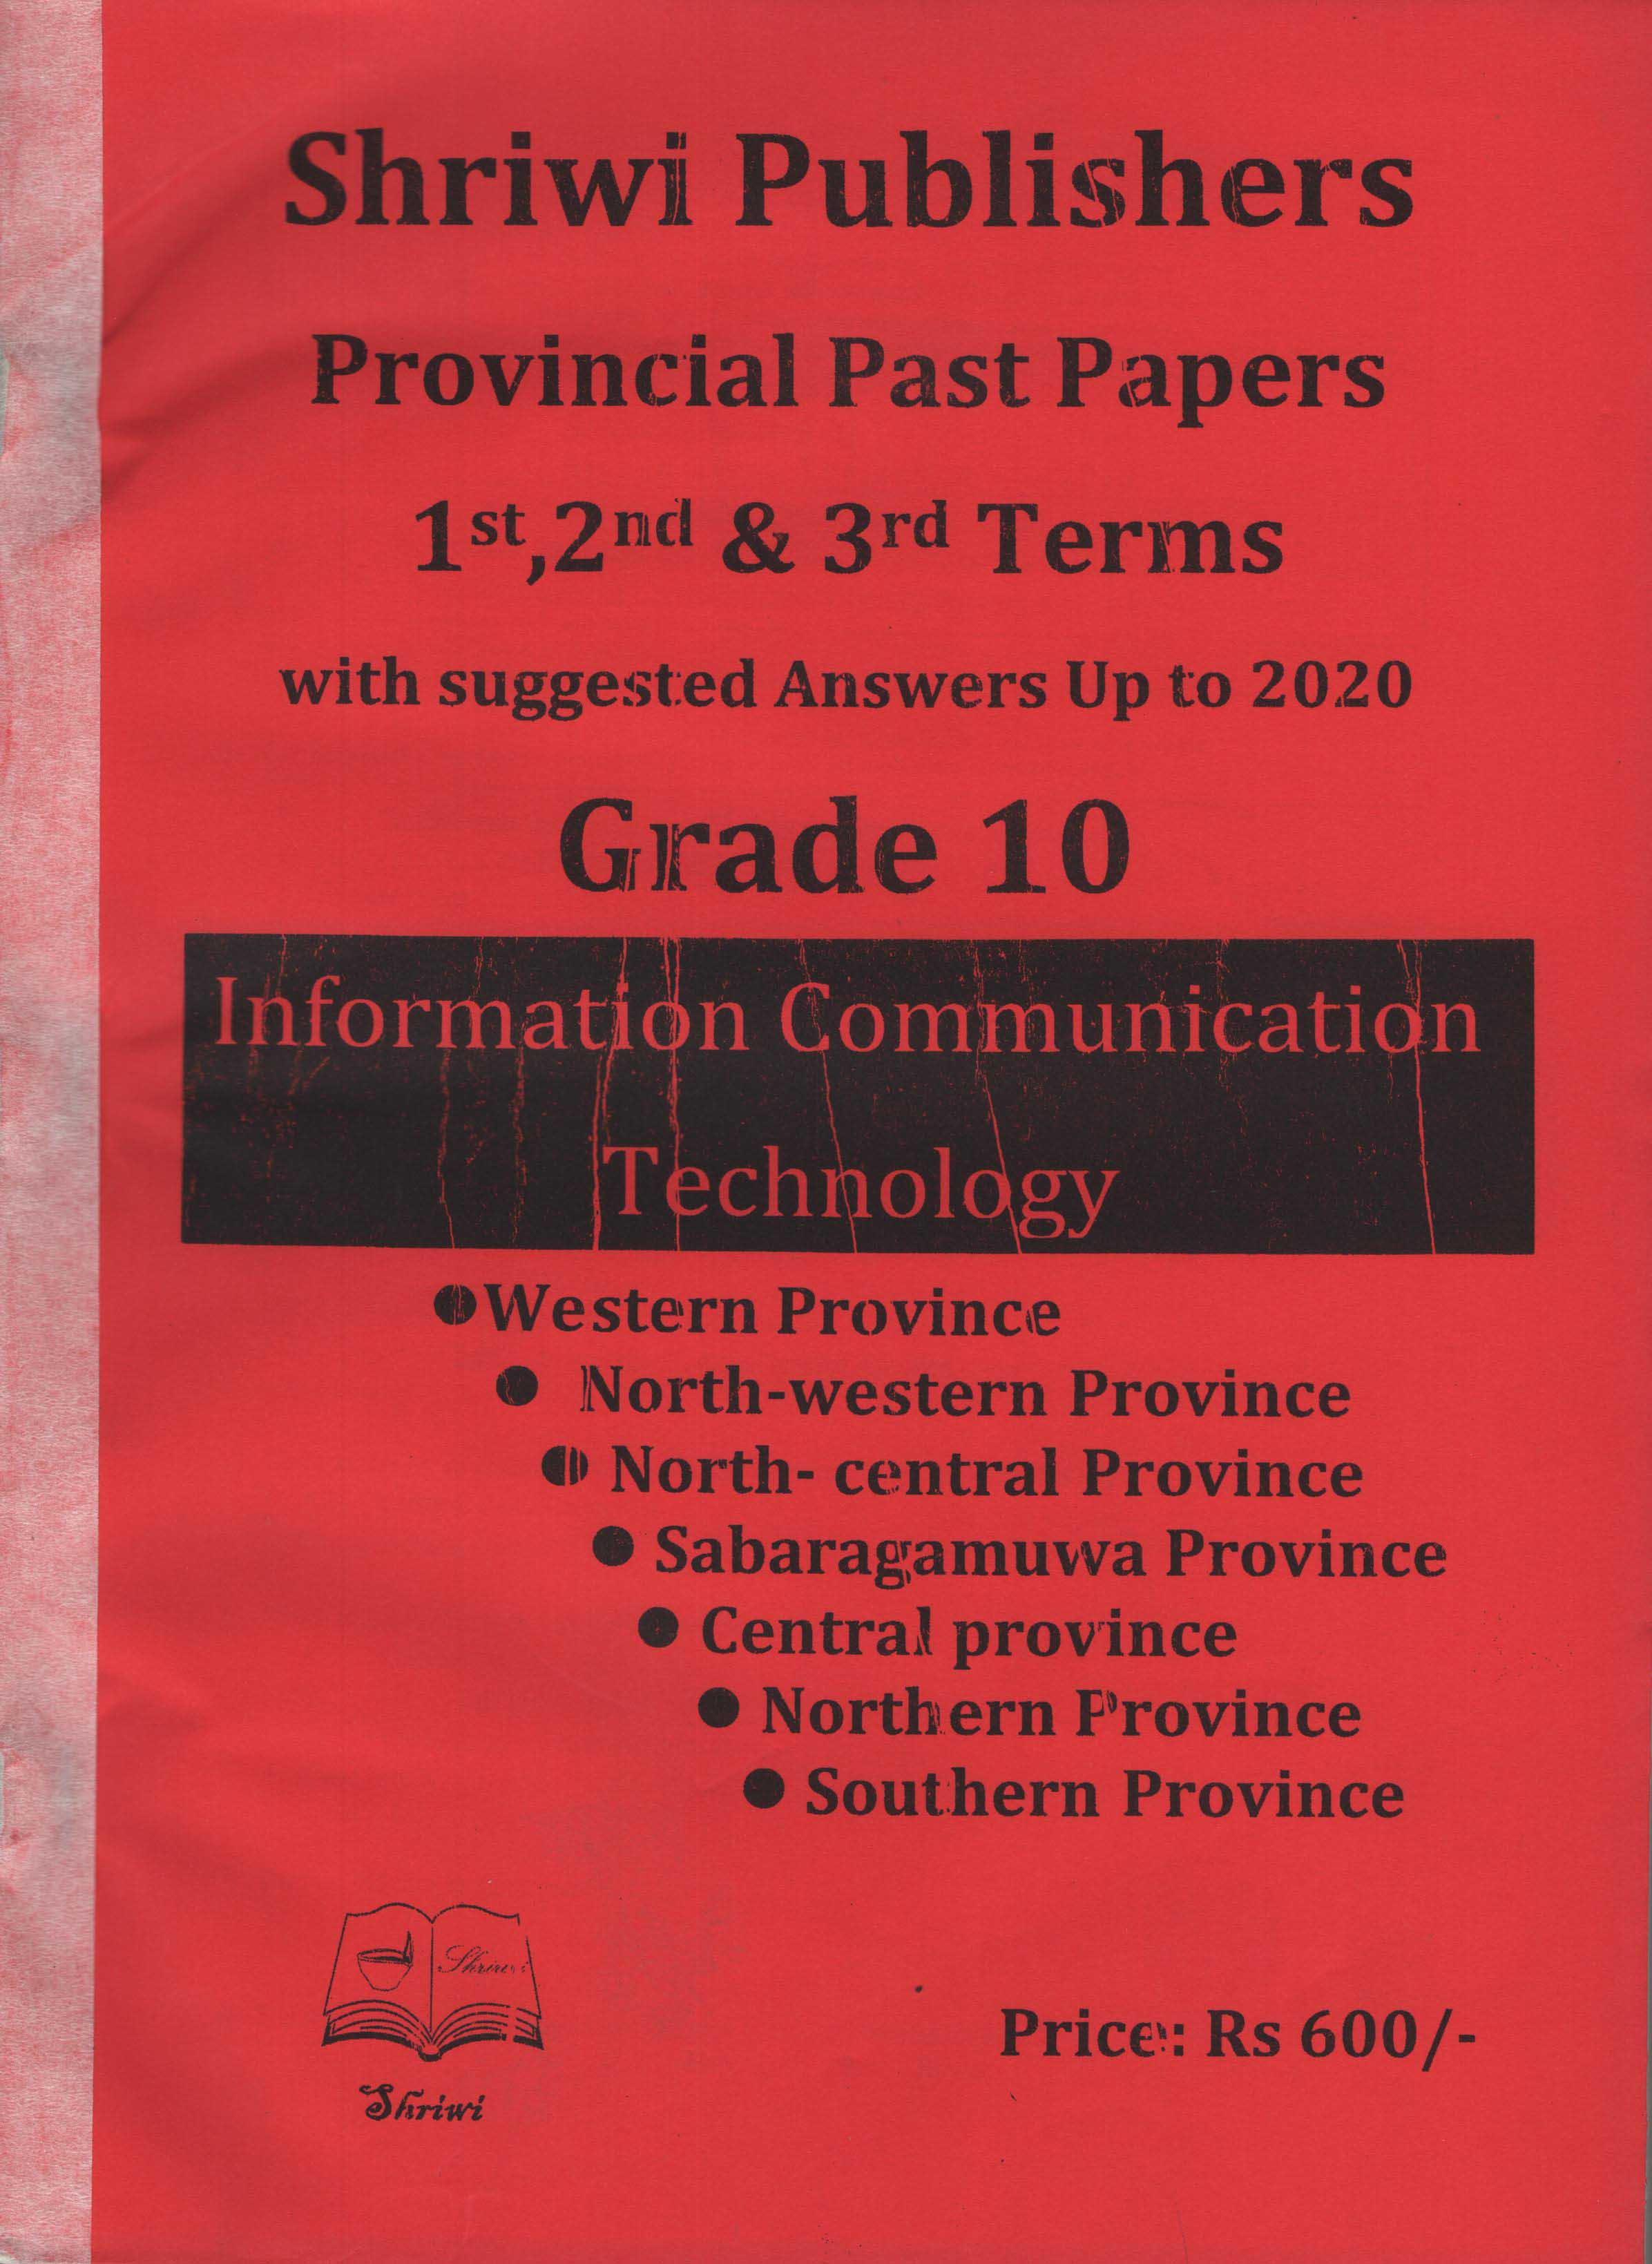 Shriwi Grade 10 Information Communication Technology Provincial Past Papers 1st 2nd  & 3rd Terms  with Suggested Answers Up to 2021 